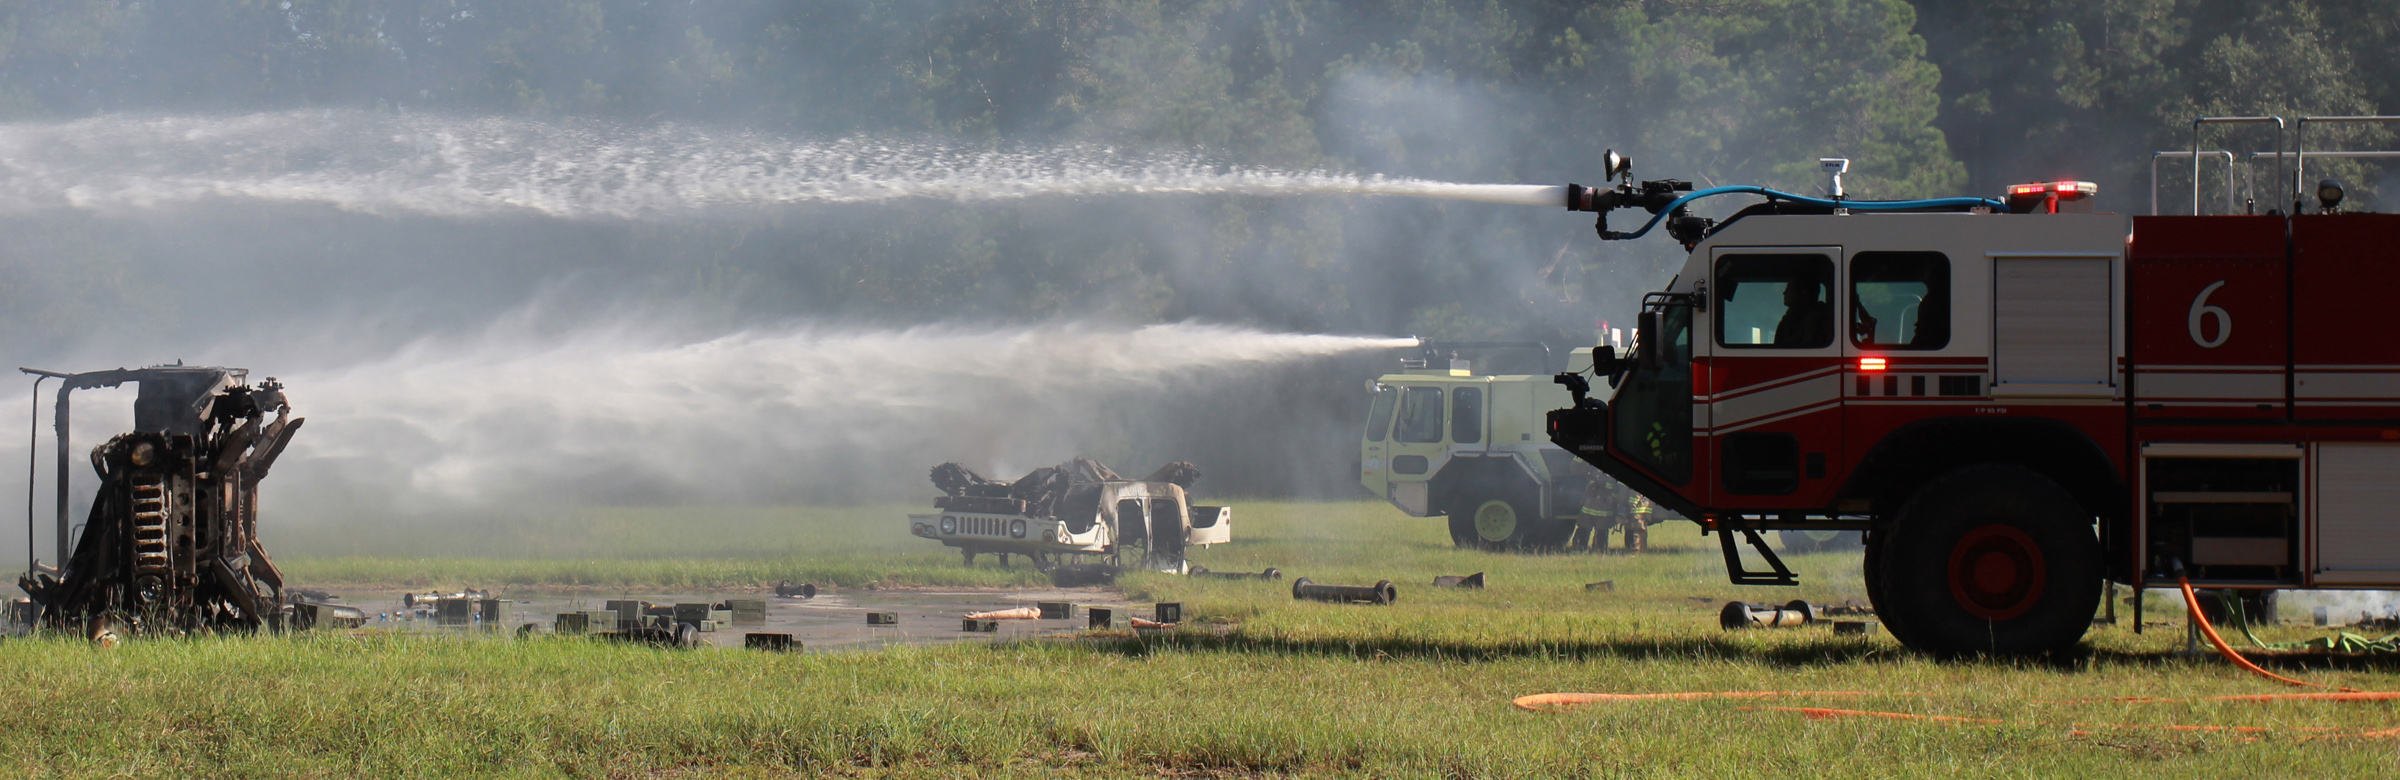  Army firefighters spray water at a smoldering Humvee one August morning at Hunter Army Airfield during Stewart Guardian 16. The training operation simulated how the Army would respond to a transport plane loaded with ammunition crashing on the insta